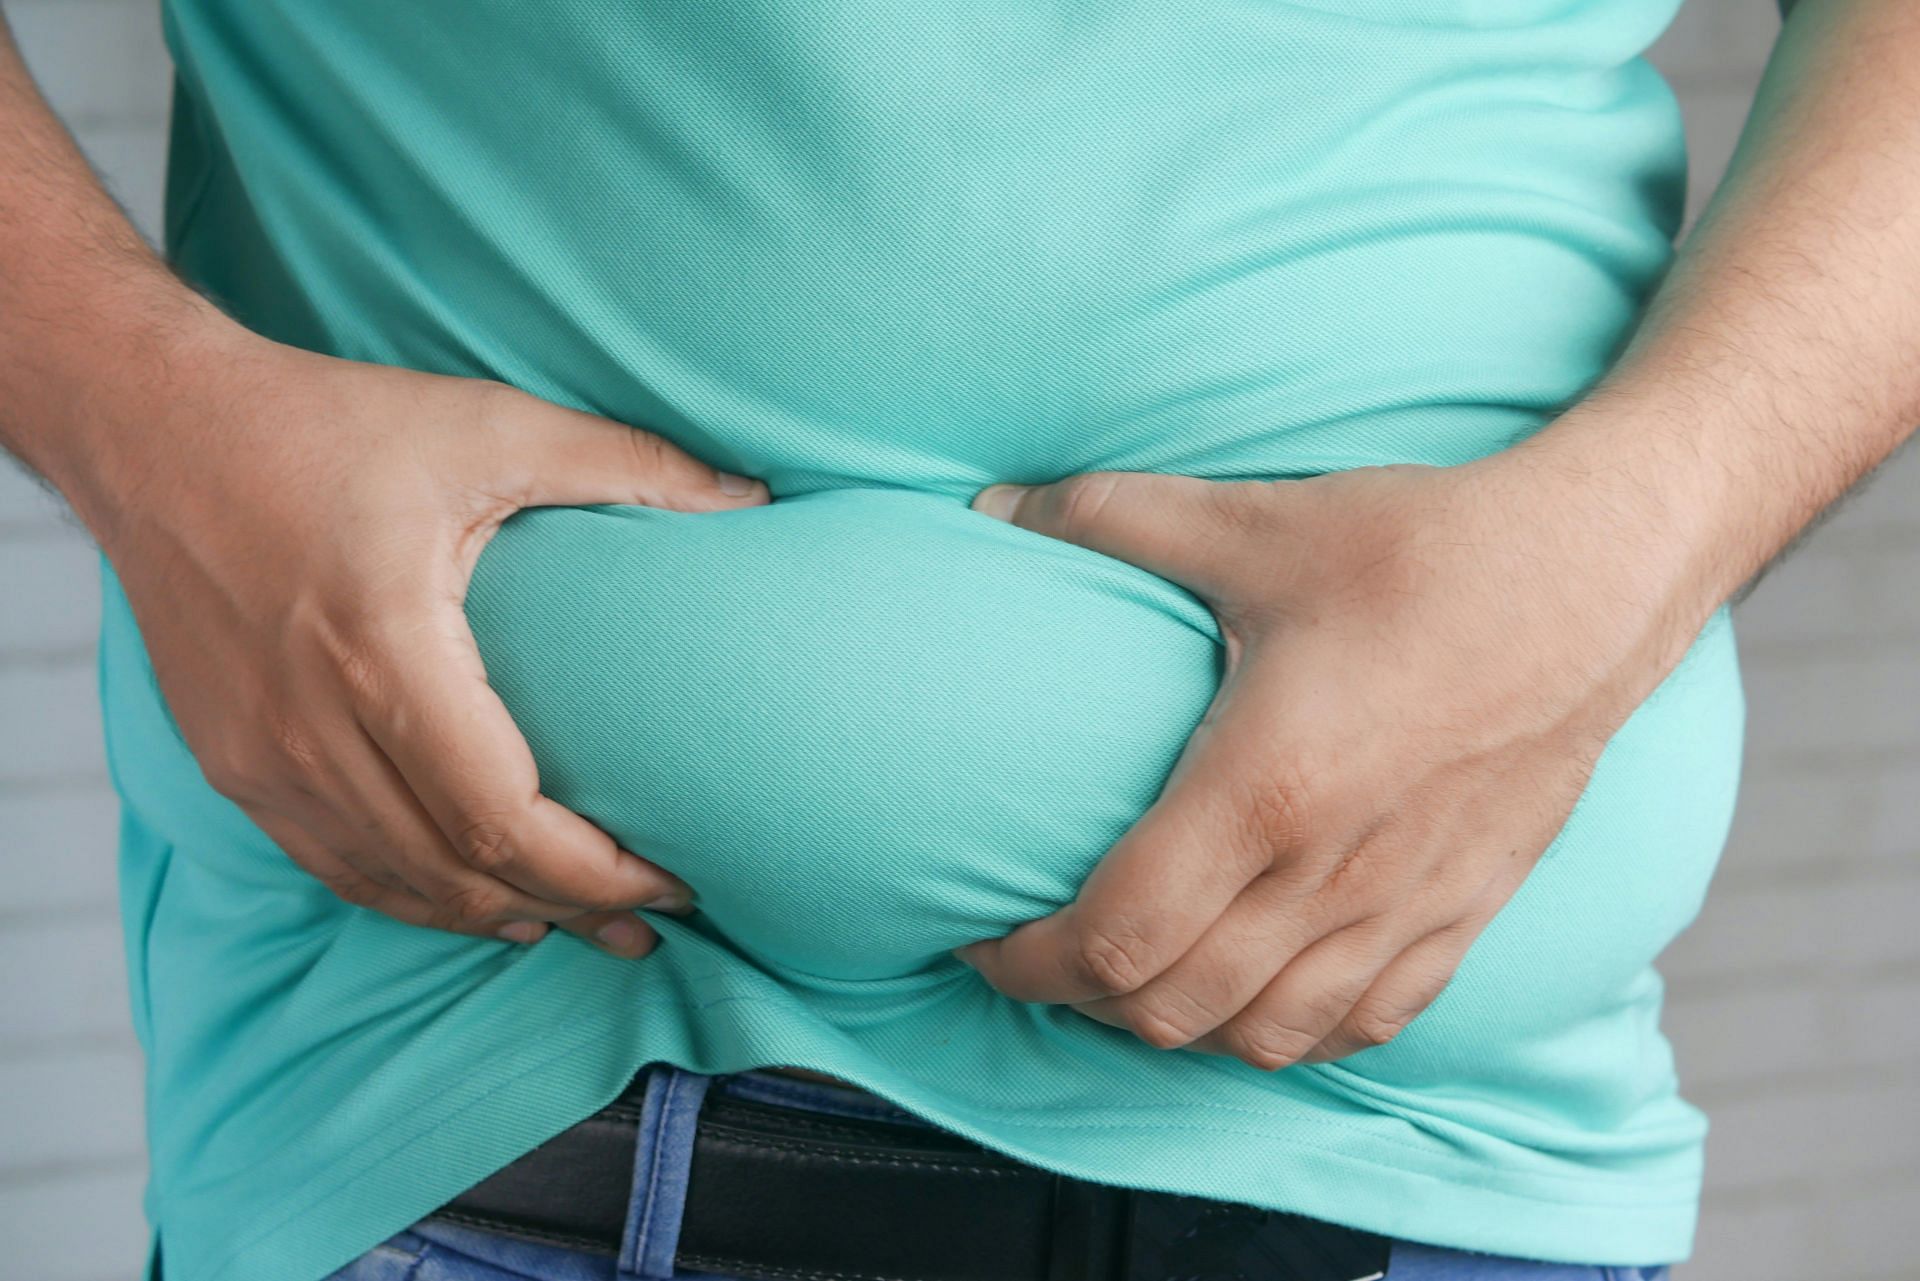 Are you obese? Then you can get an umbilical hernia. (Image by Towfiqu Barbhuiya/Unsplash)